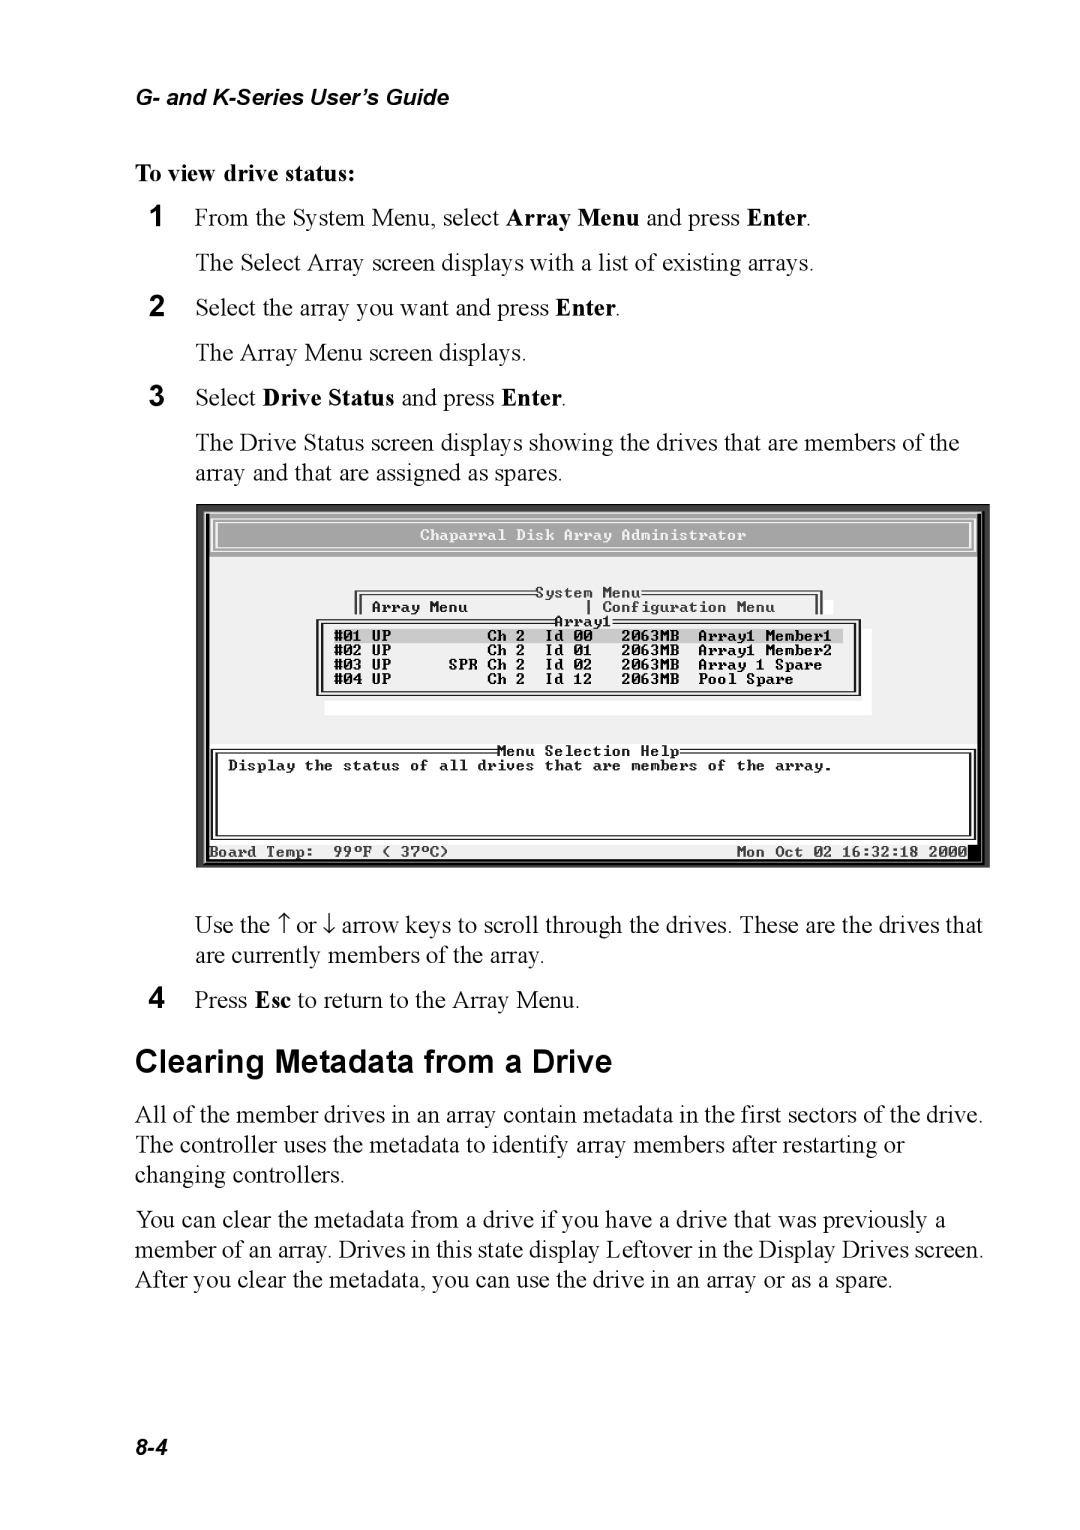 Chaparral K5312/K7313, G5312/G7313 manual Clearing Metadata from a Drive, To view drive status 